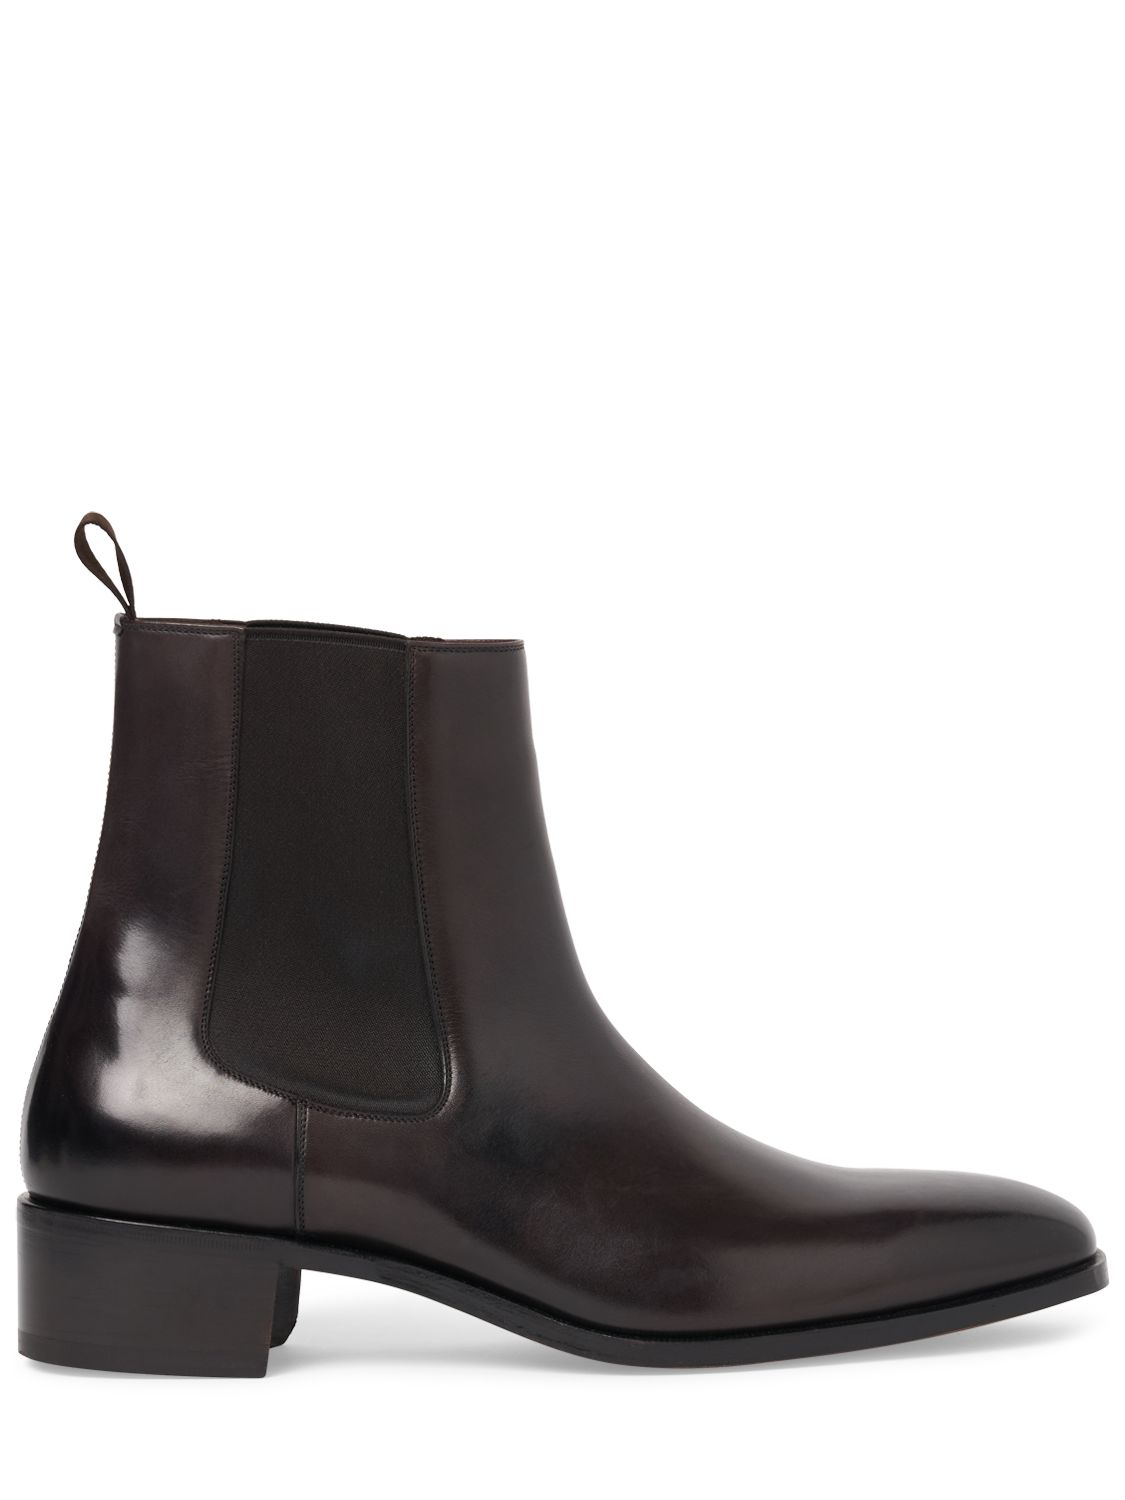 Alec Leather Chelsea Boots